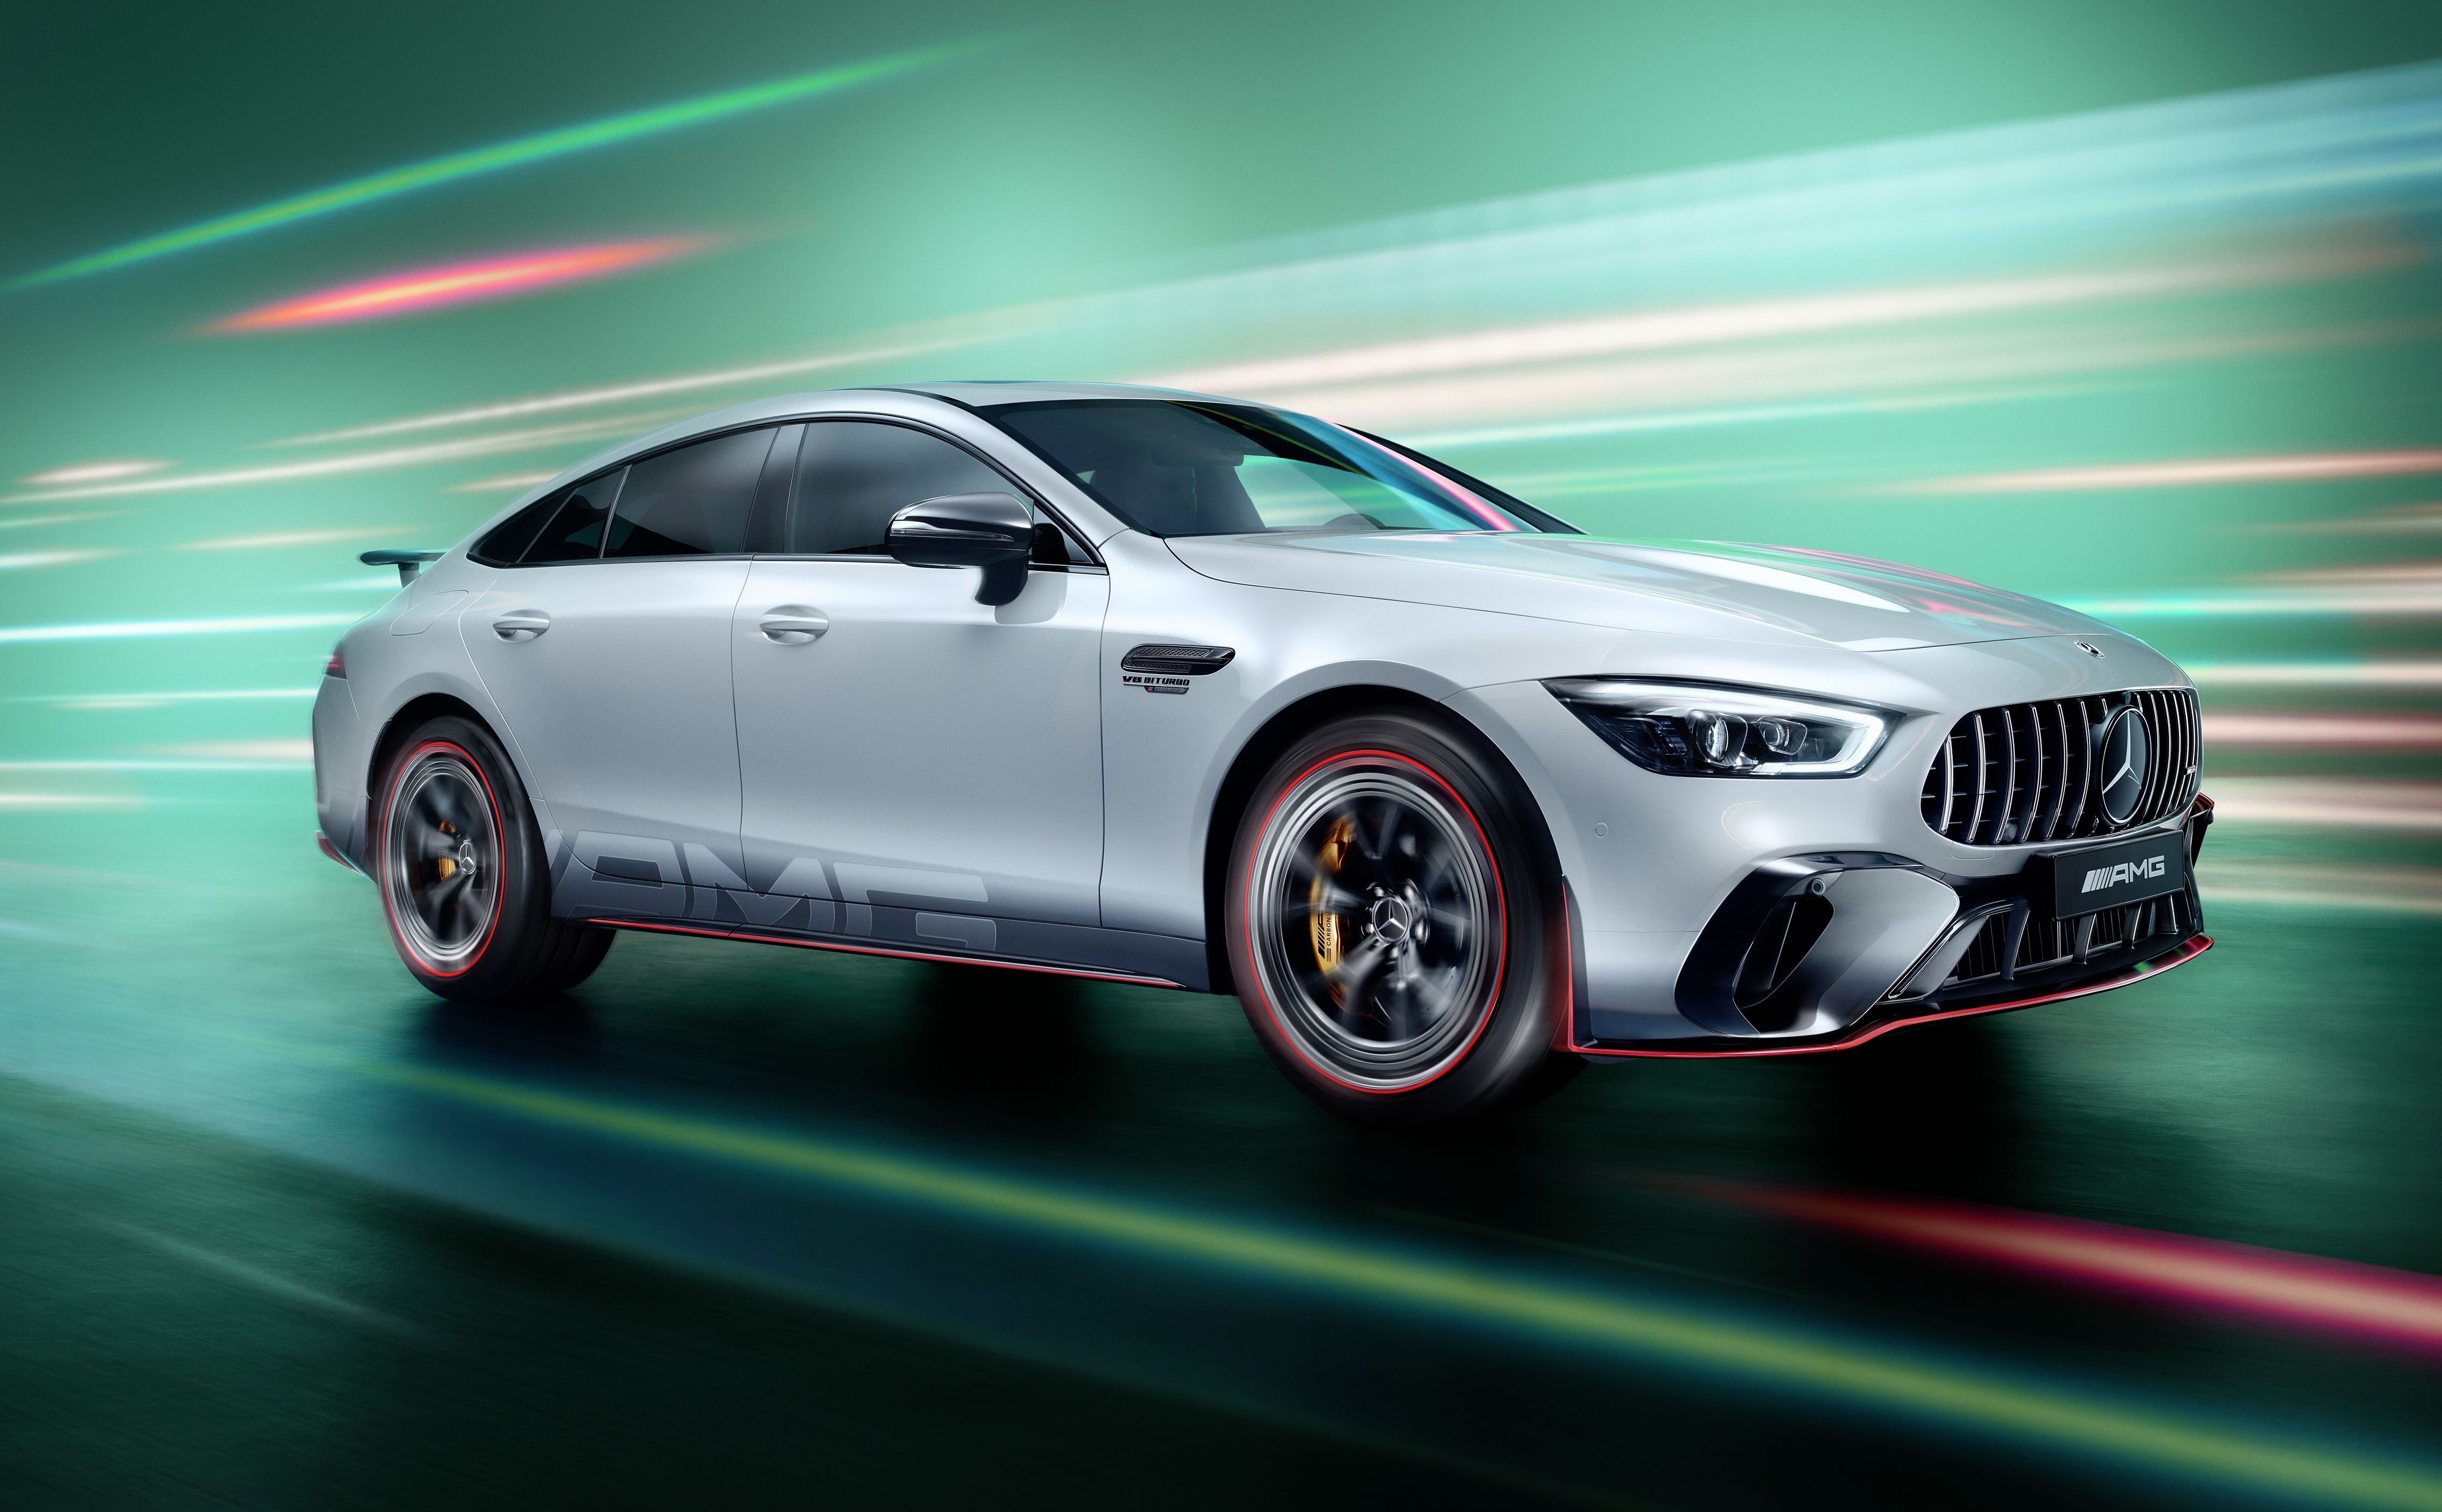 2022 The Mercedes-AMG GT 63 S E Performance F1 Edition Represents $25,000 Worth of Appearance Upgrades